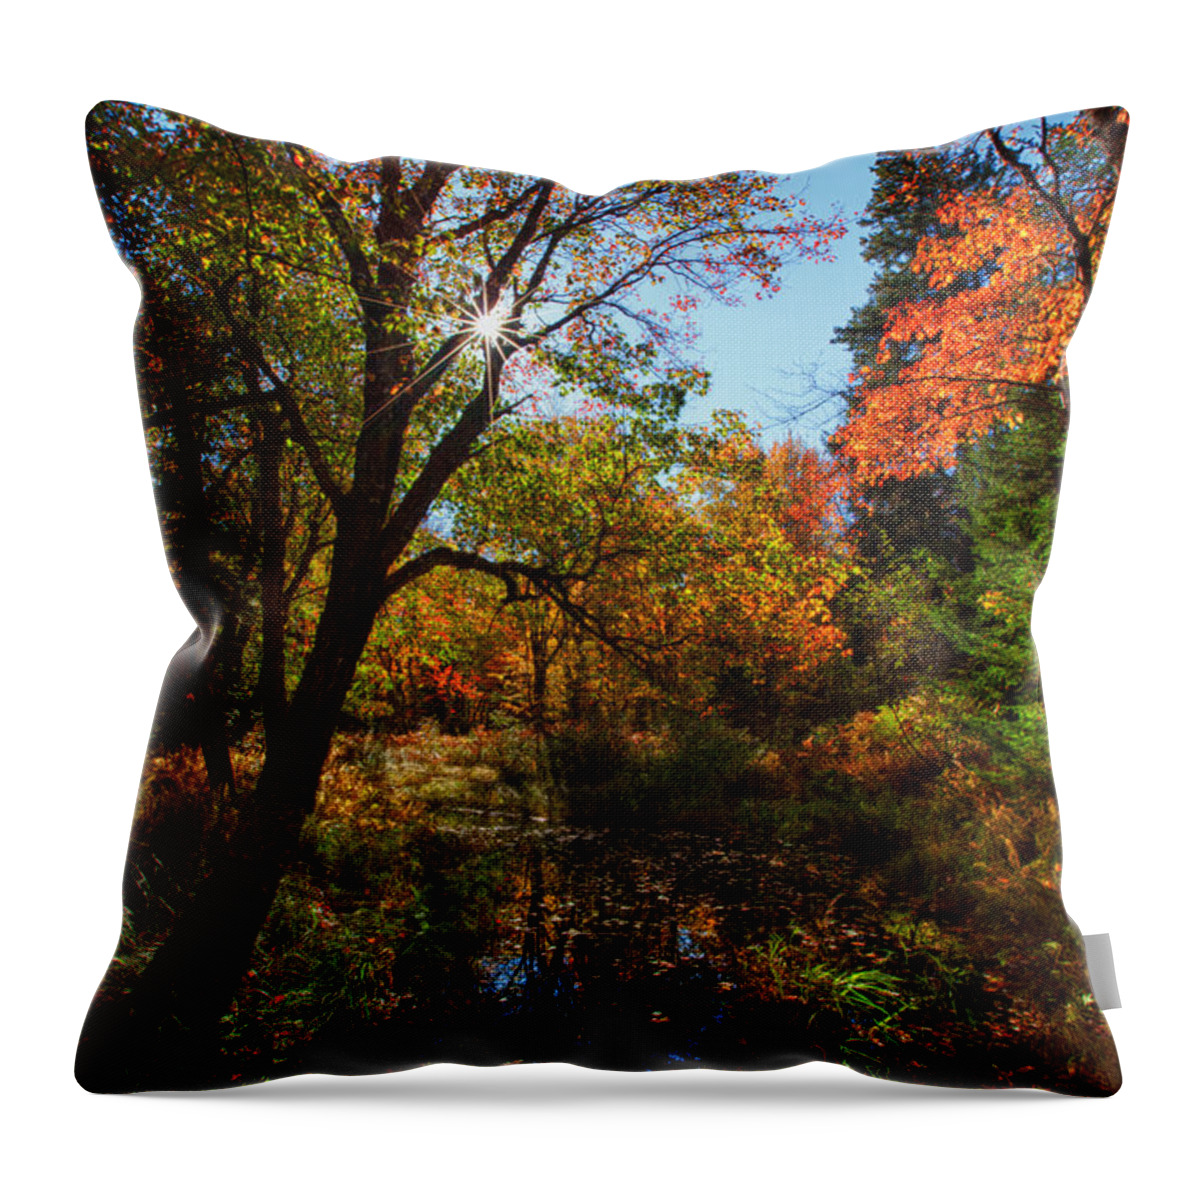 Kelly River Wilderness Throw Pillow featuring the photograph Fall Meadow And Sunburst by Irwin Barrett